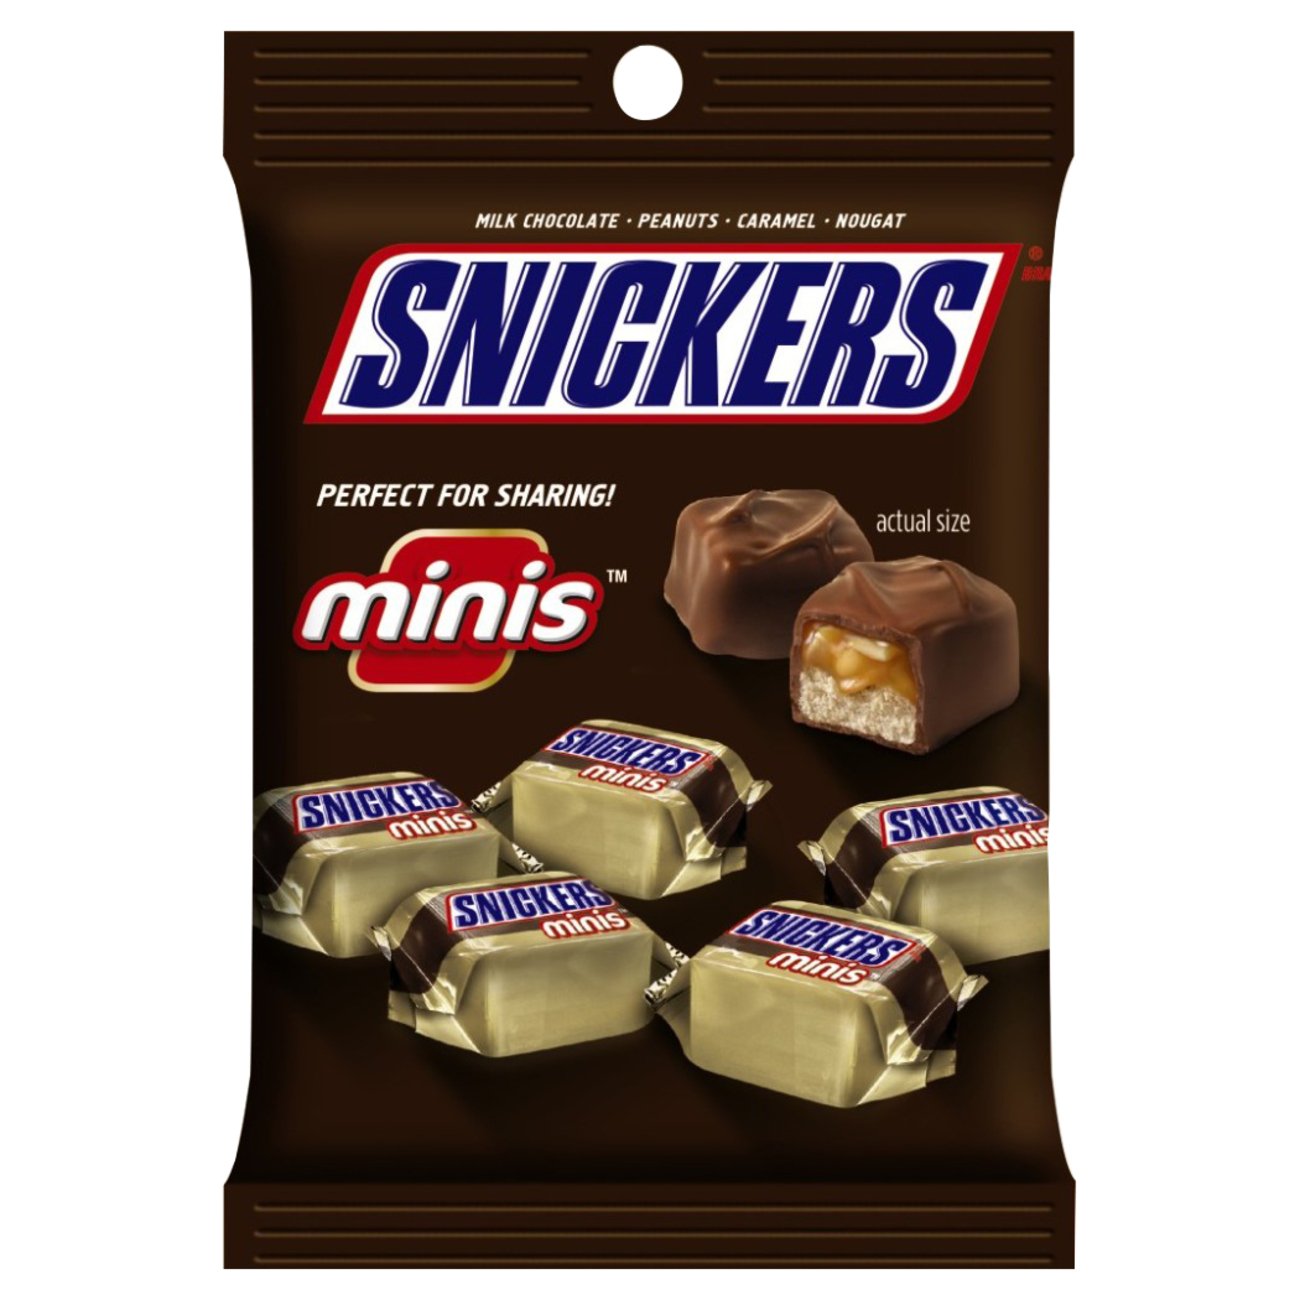 Snickers Minis Candy Bars Bag - Shop Candy at H-E-B